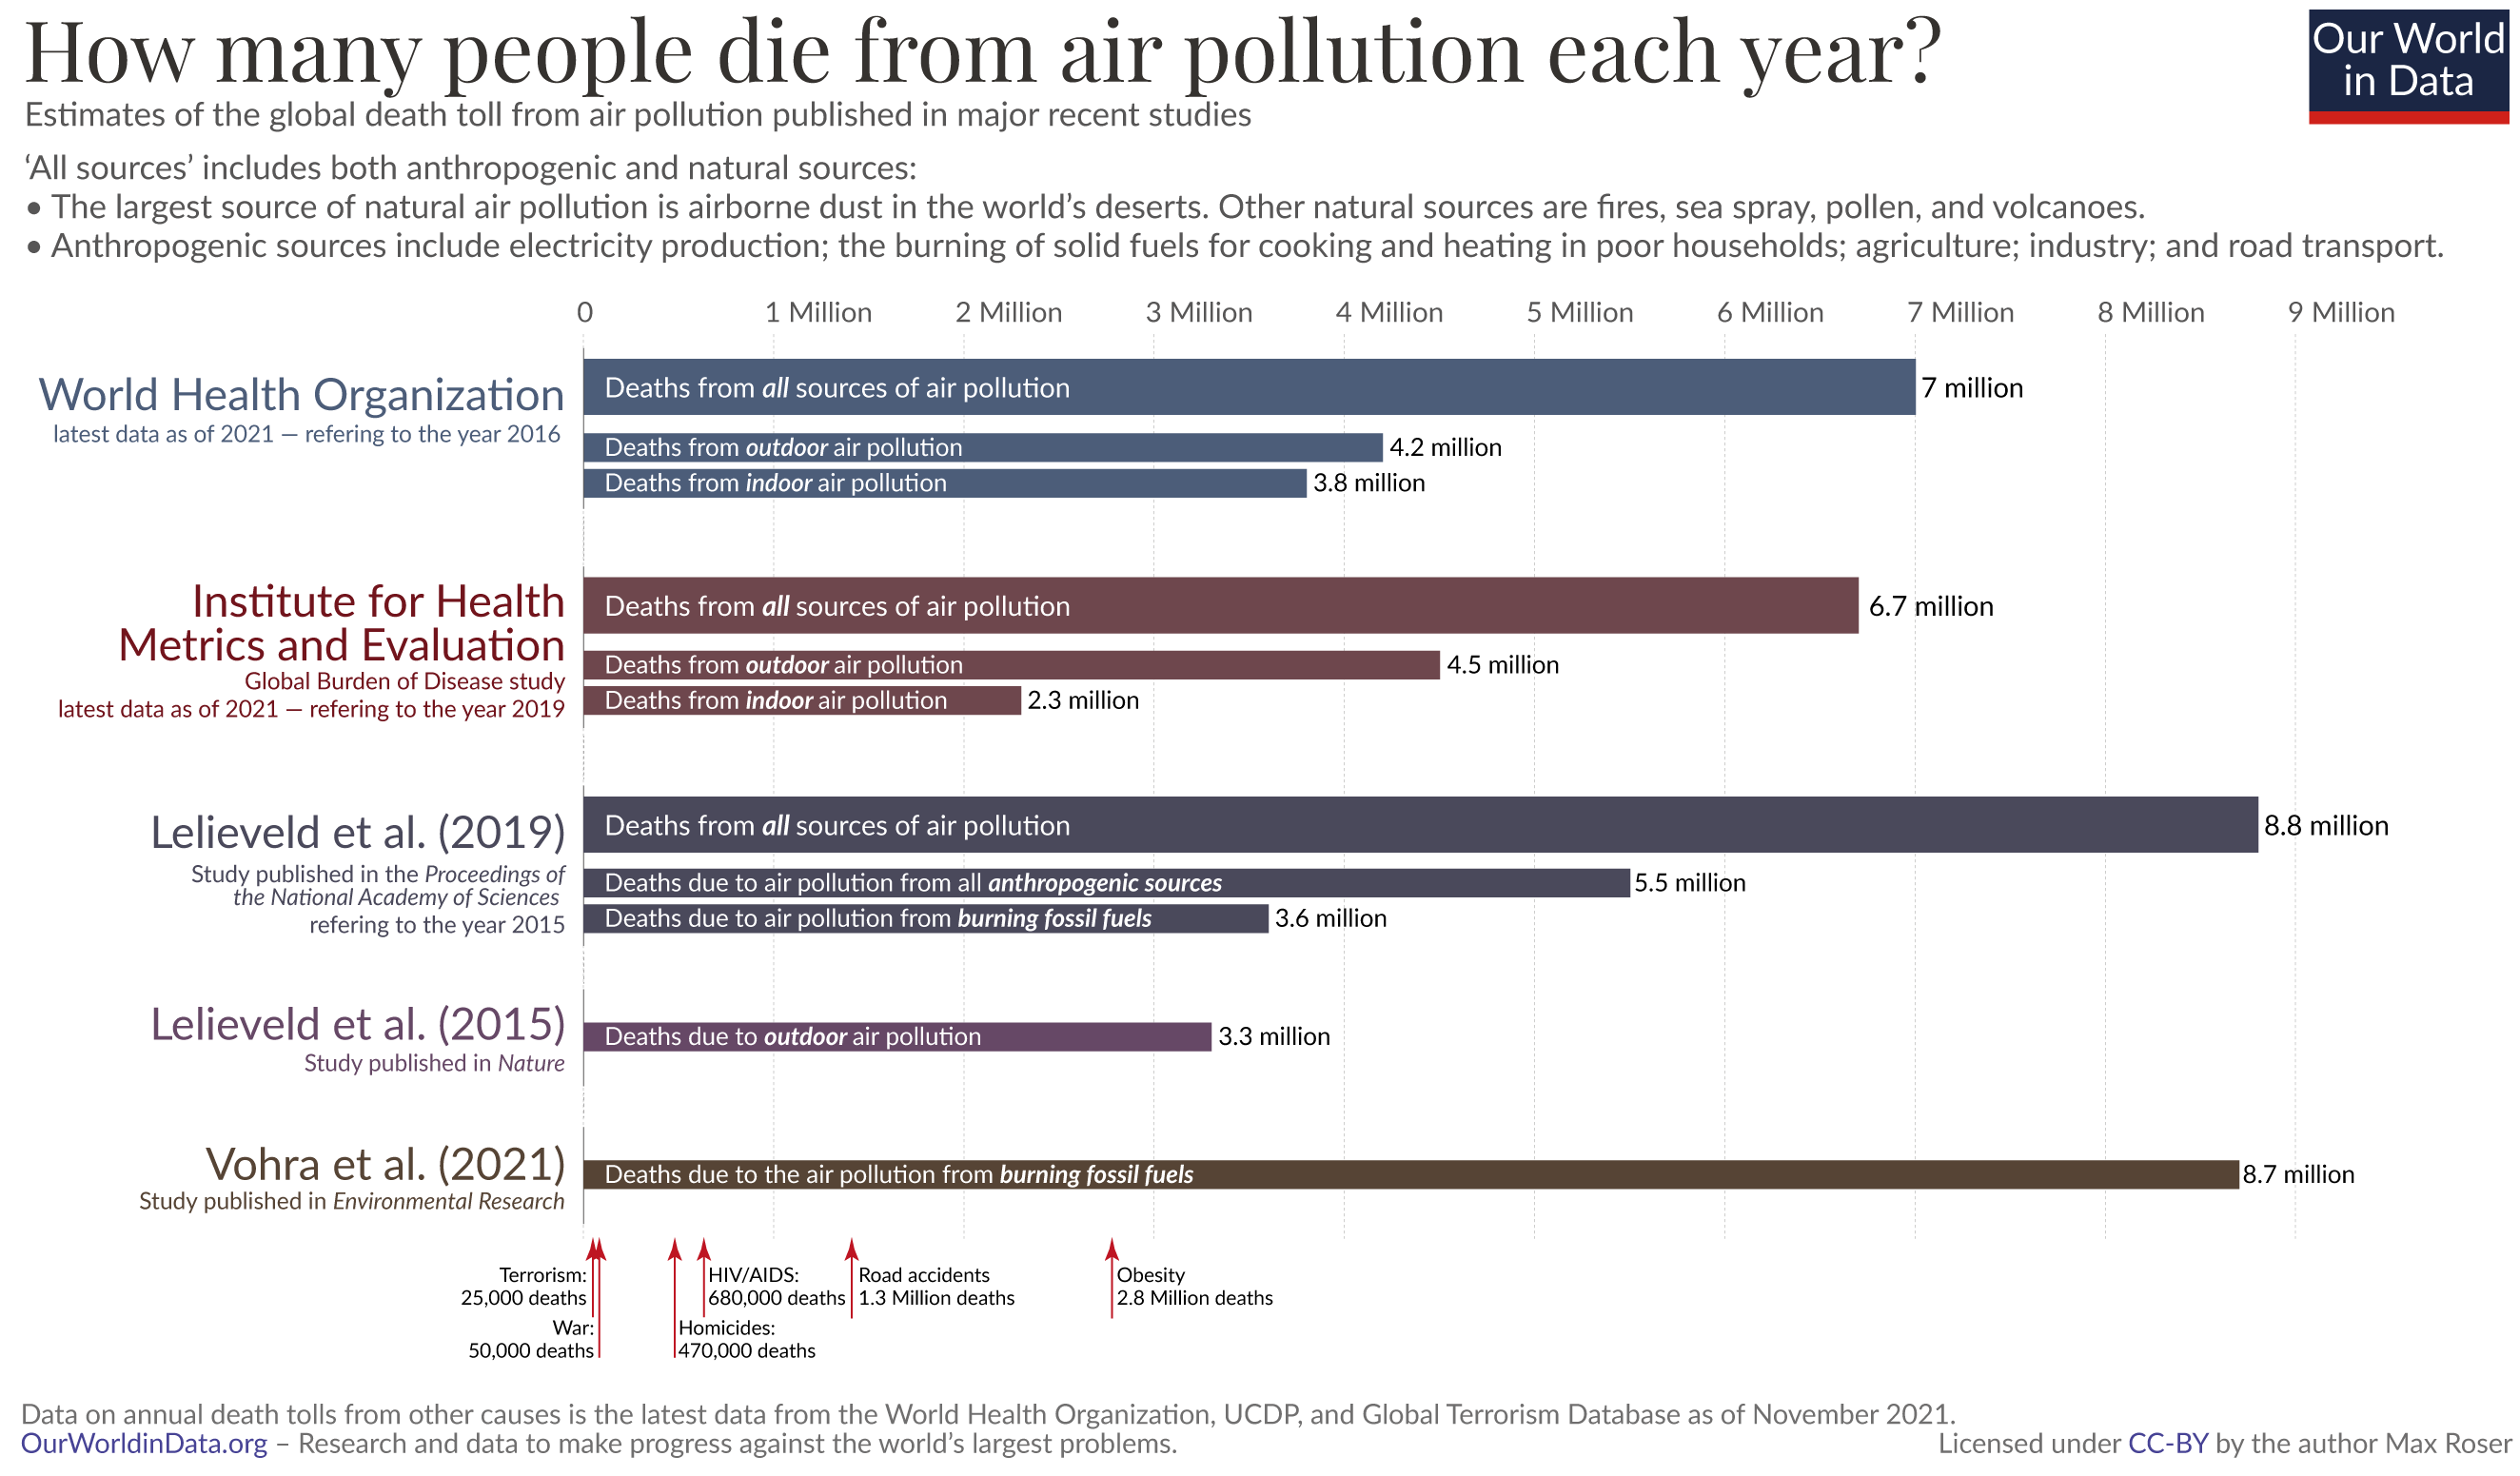 https://ourworldindata.org/images/published/How-many-people-die-from-air-pollution-1-1.png